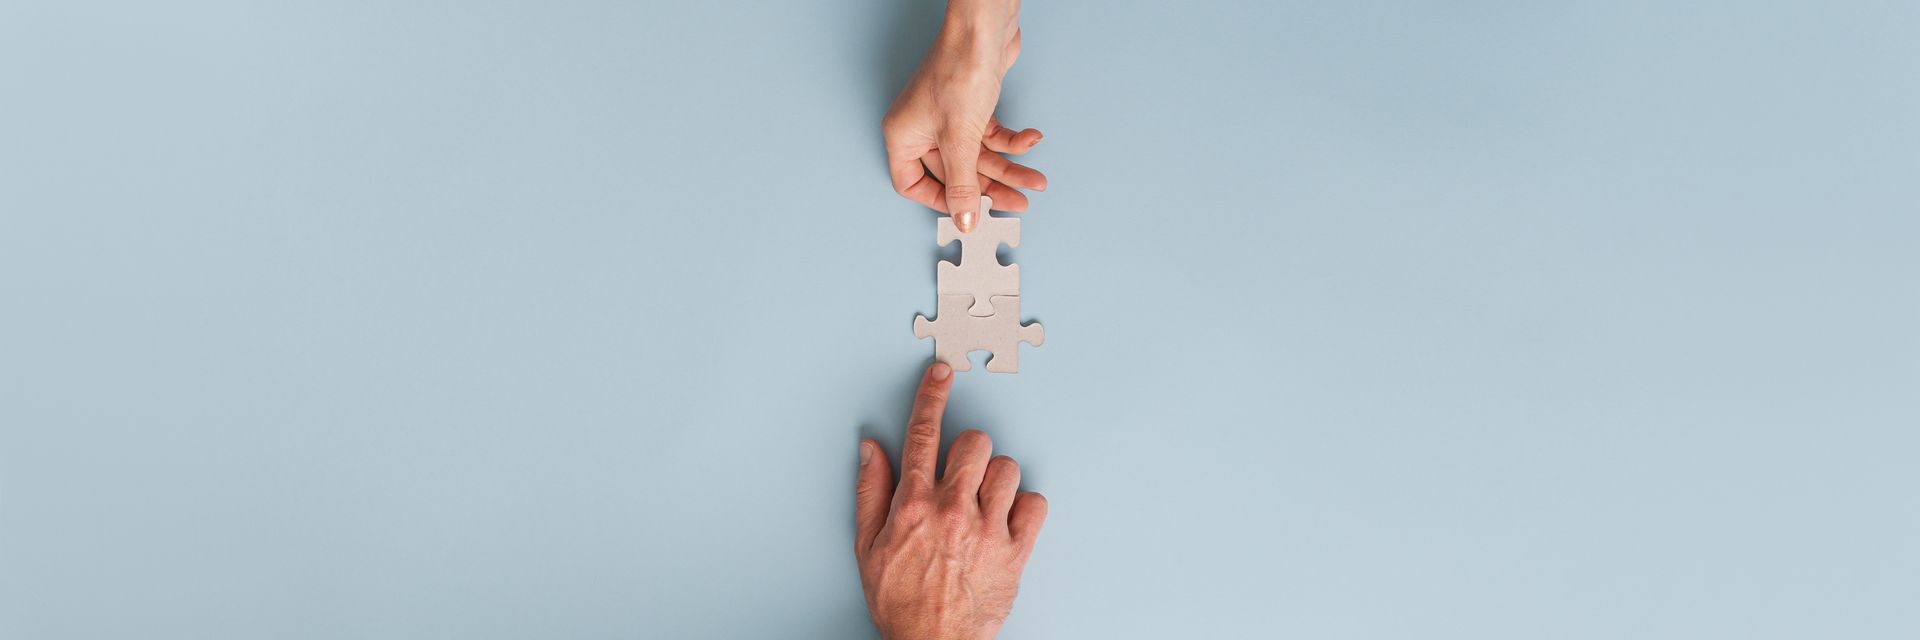 A person is putting a puzzle piece into another person 's hand.